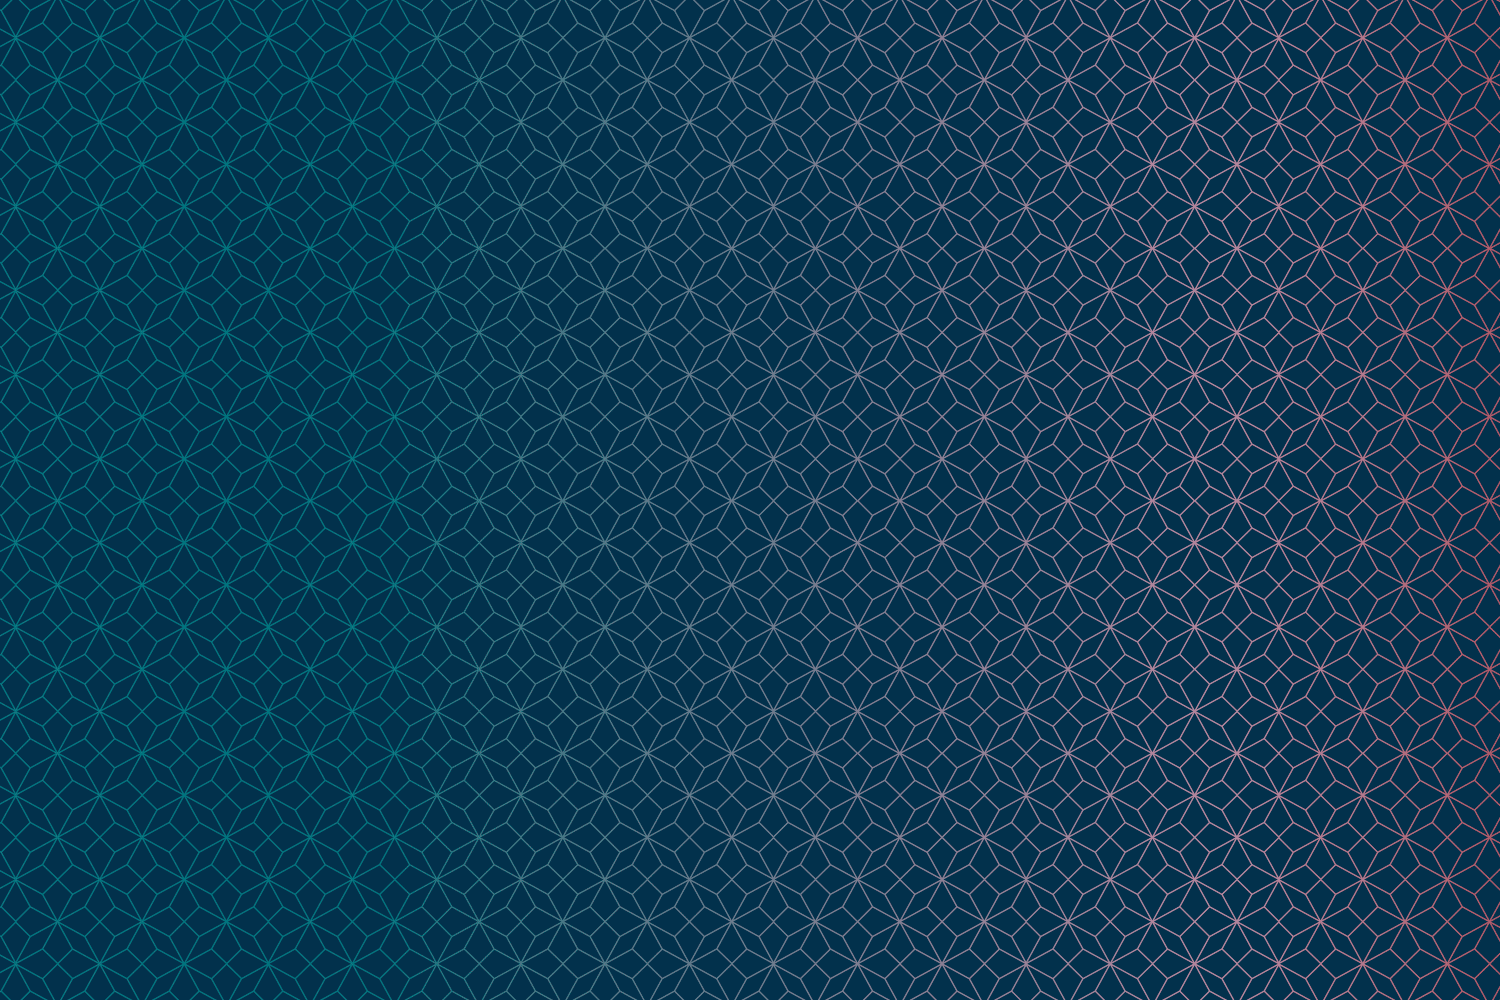 Midnight background with teal and coral gradient origami pattern